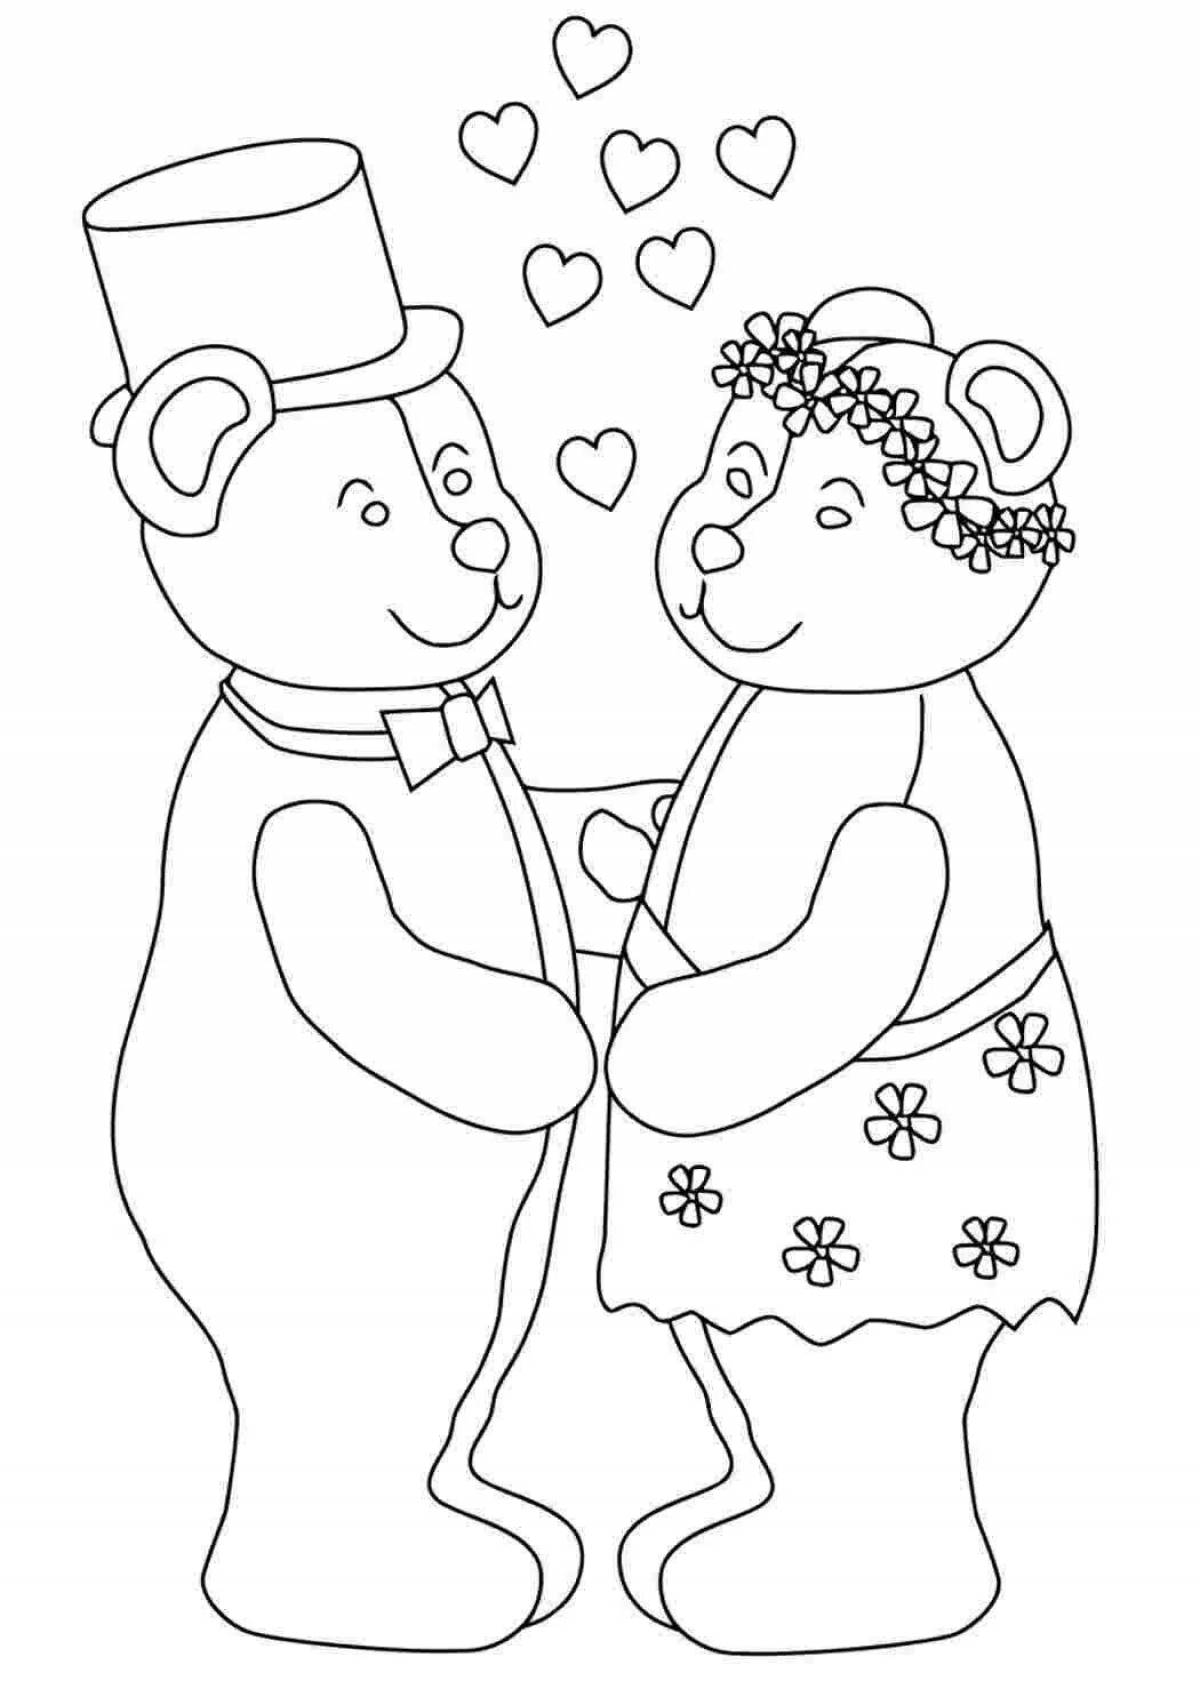 Awesome wedding anniversary coloring book